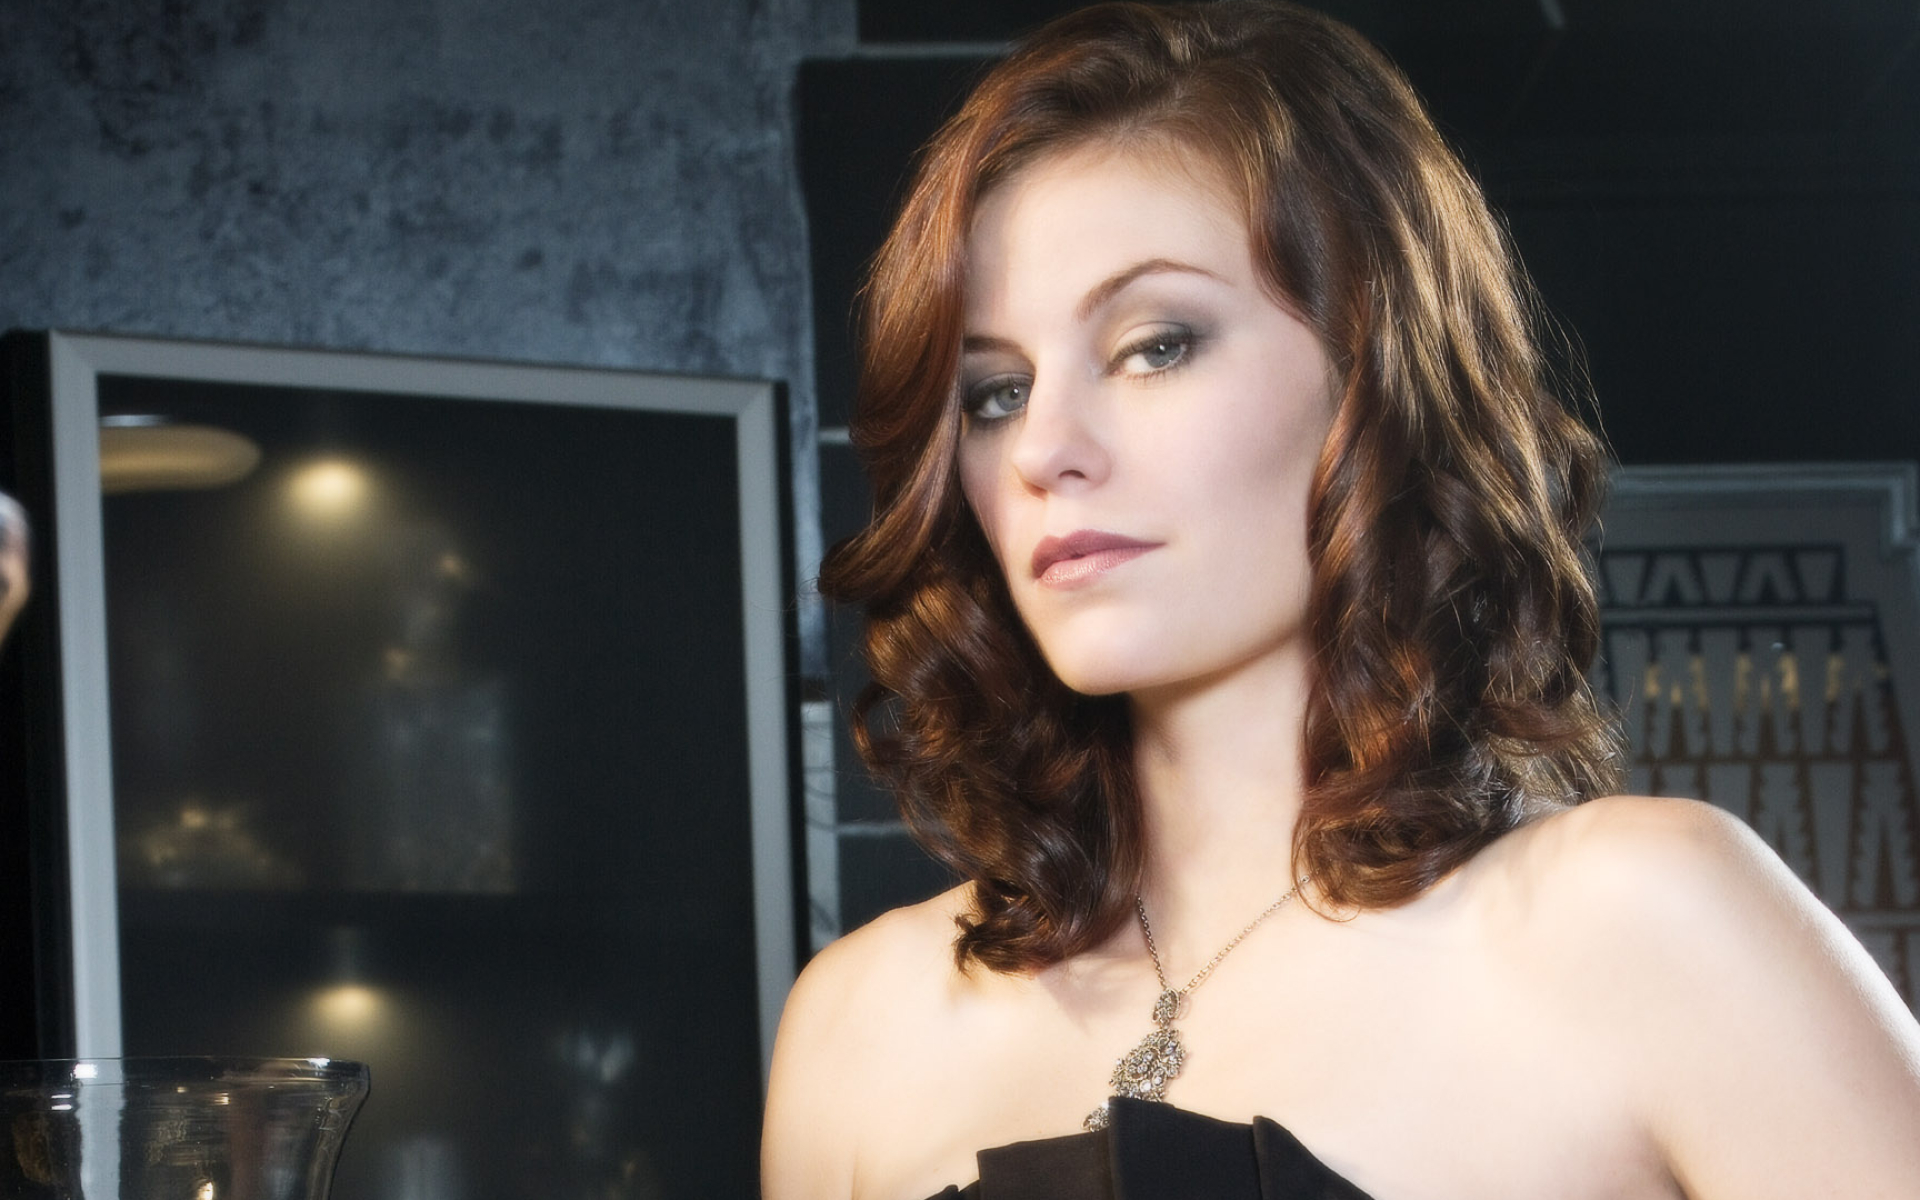 Smallville (TV Series): Cassidy Freeman as Tess Mercer, An American actress and musician, The CW's superhero drama. 1920x1200 HD Background.